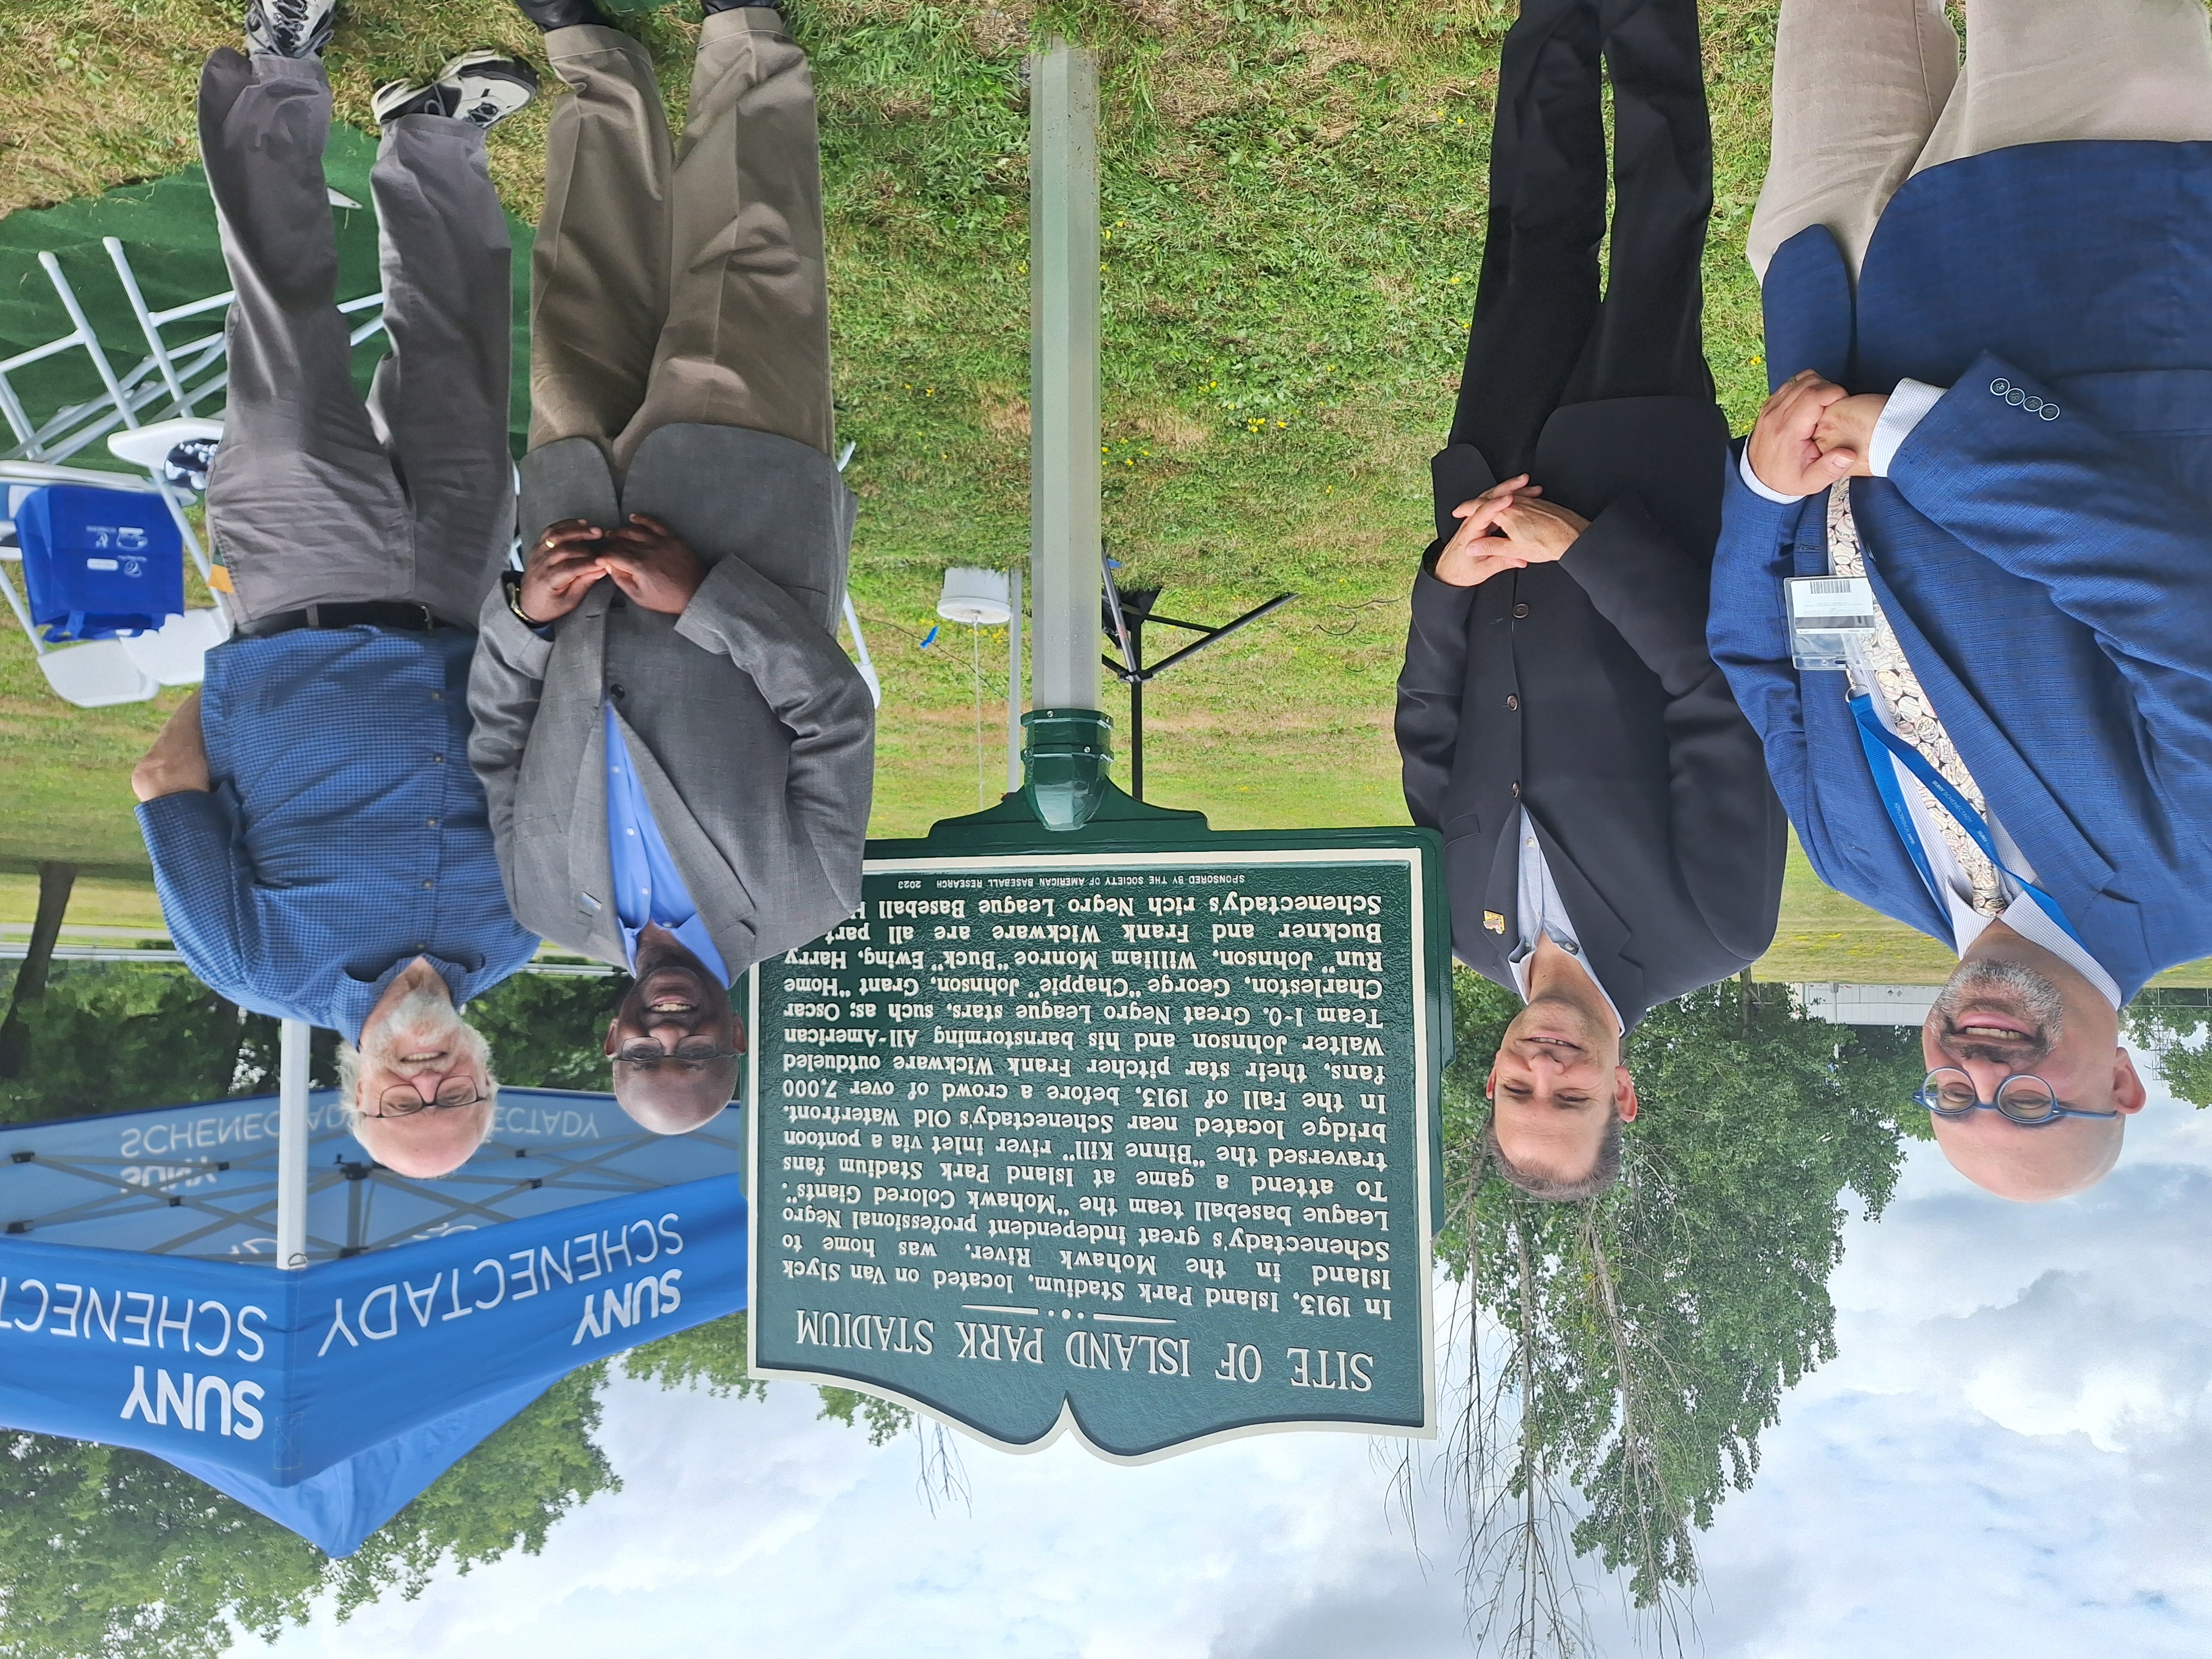 College, city, county historians standing near historical marker